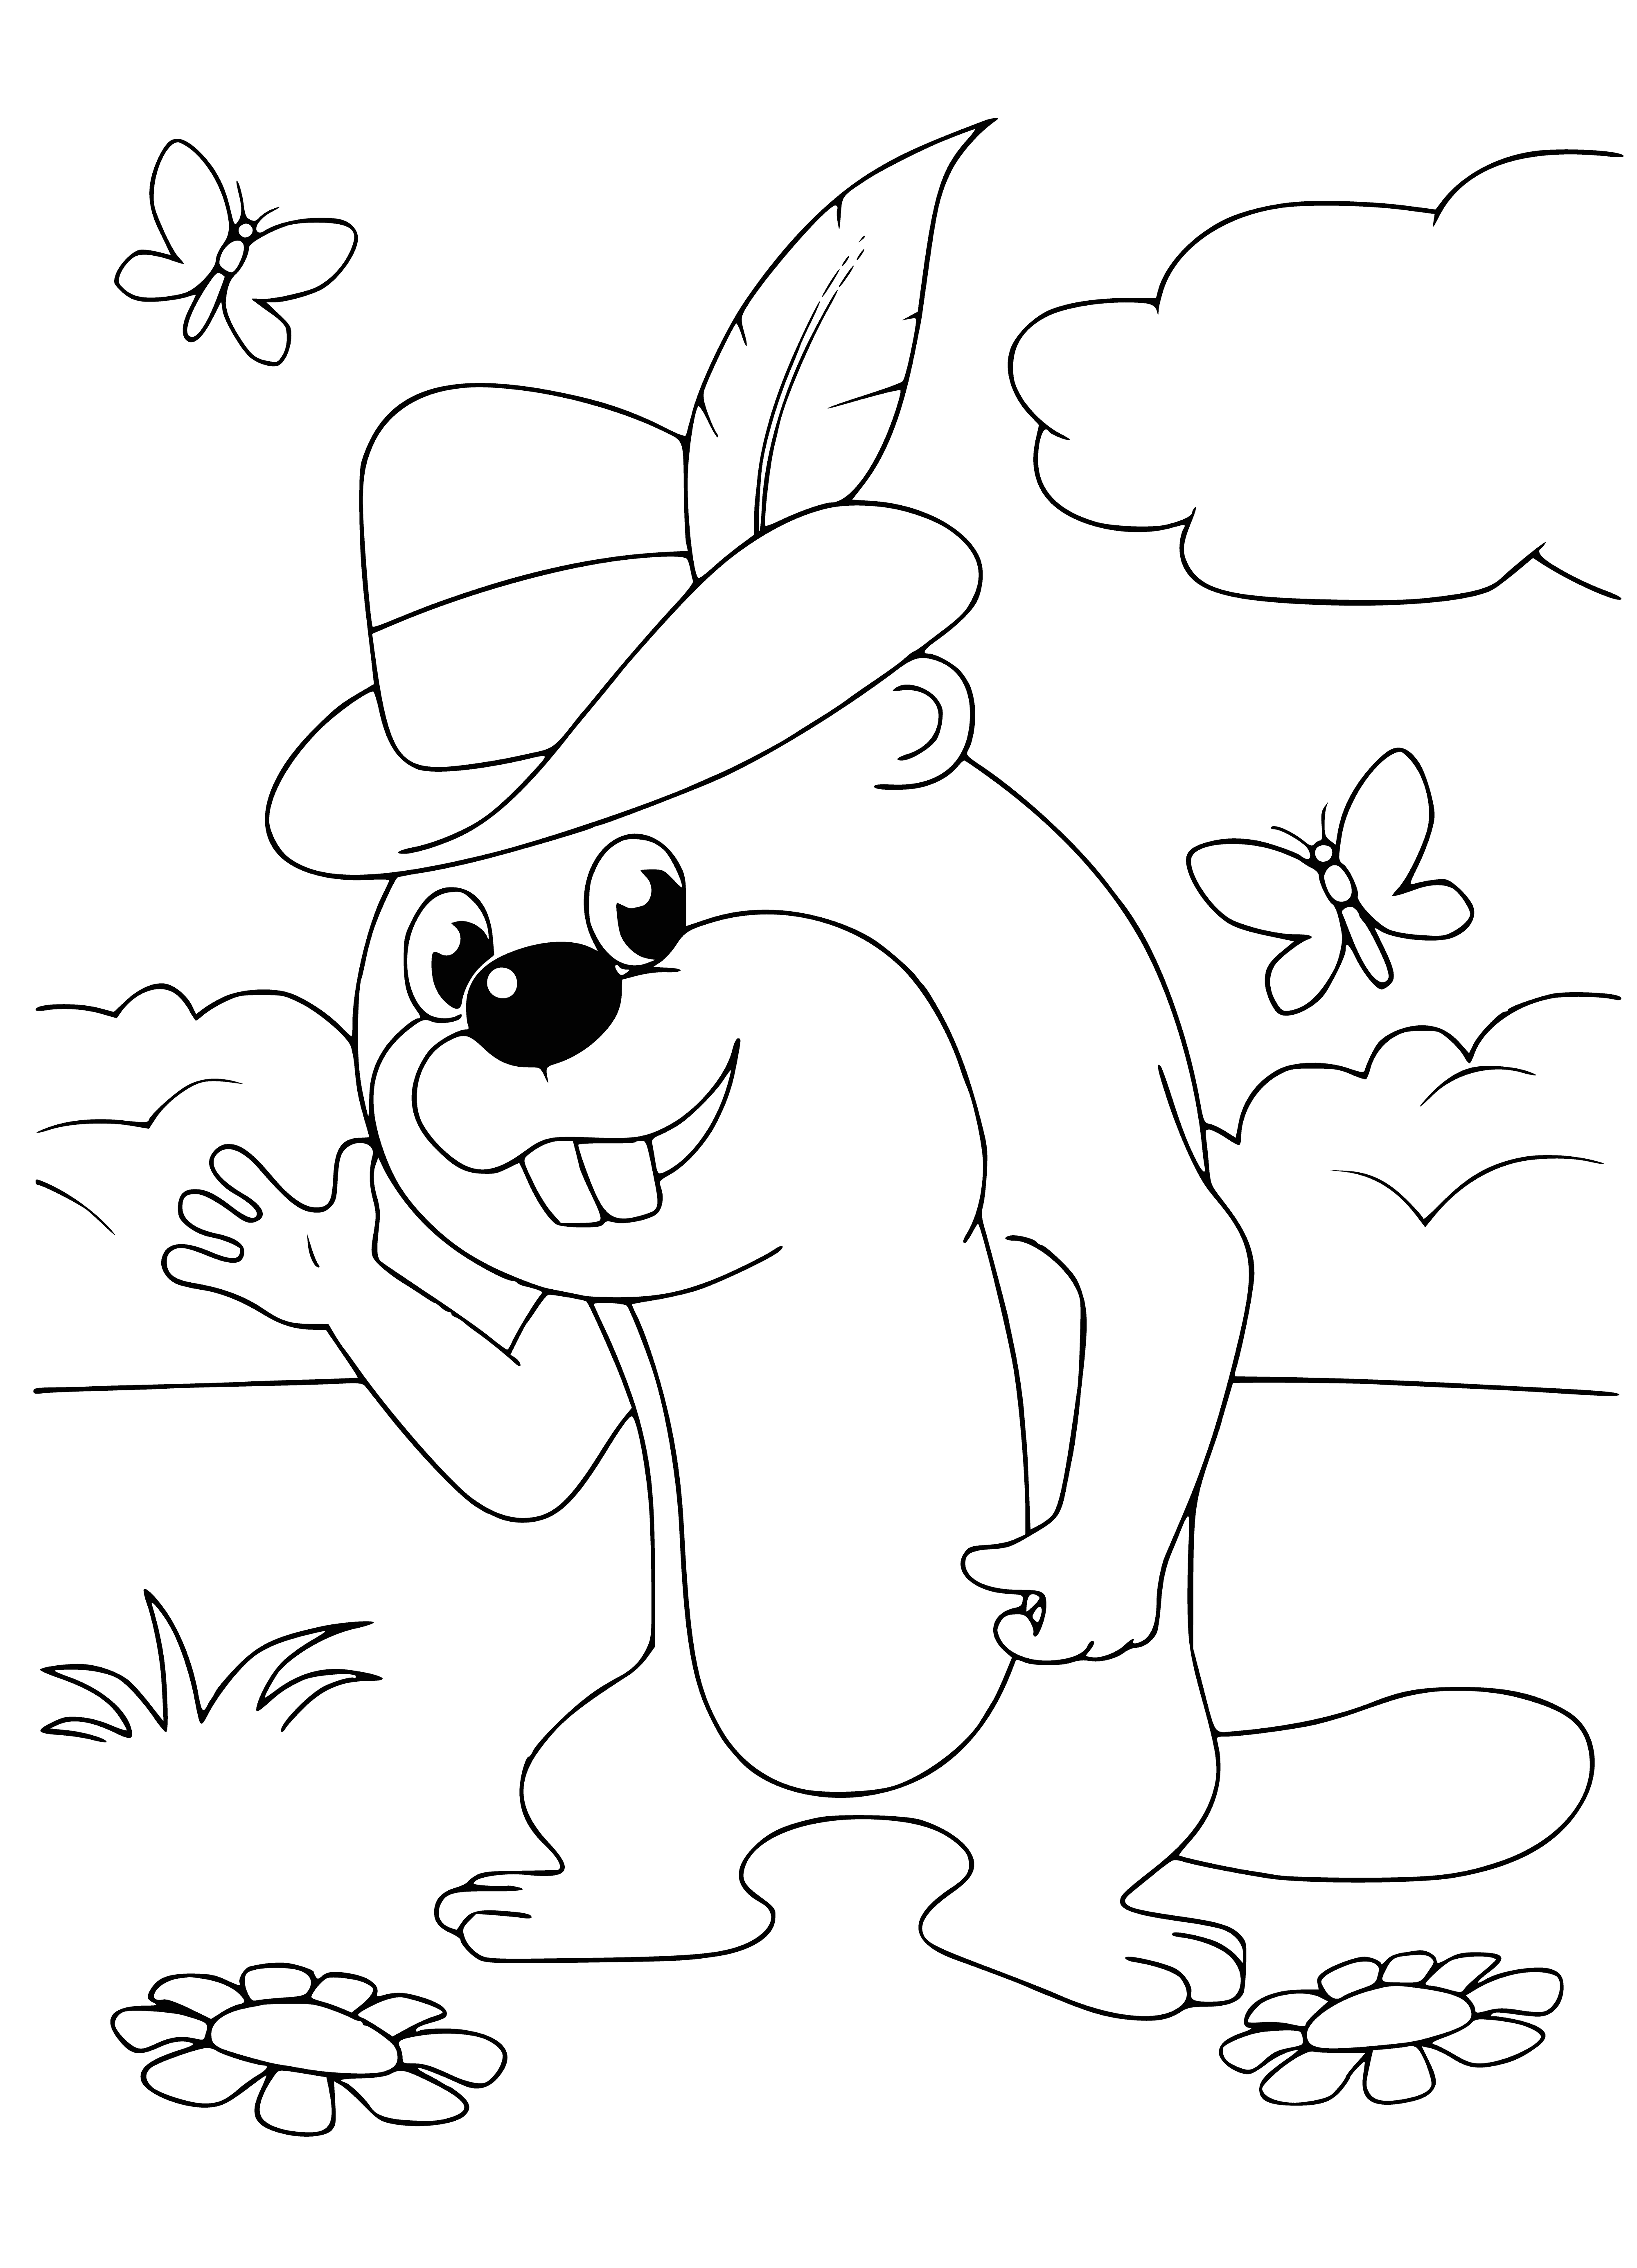 coloring page: Beaver rows log to shore while dog watches.